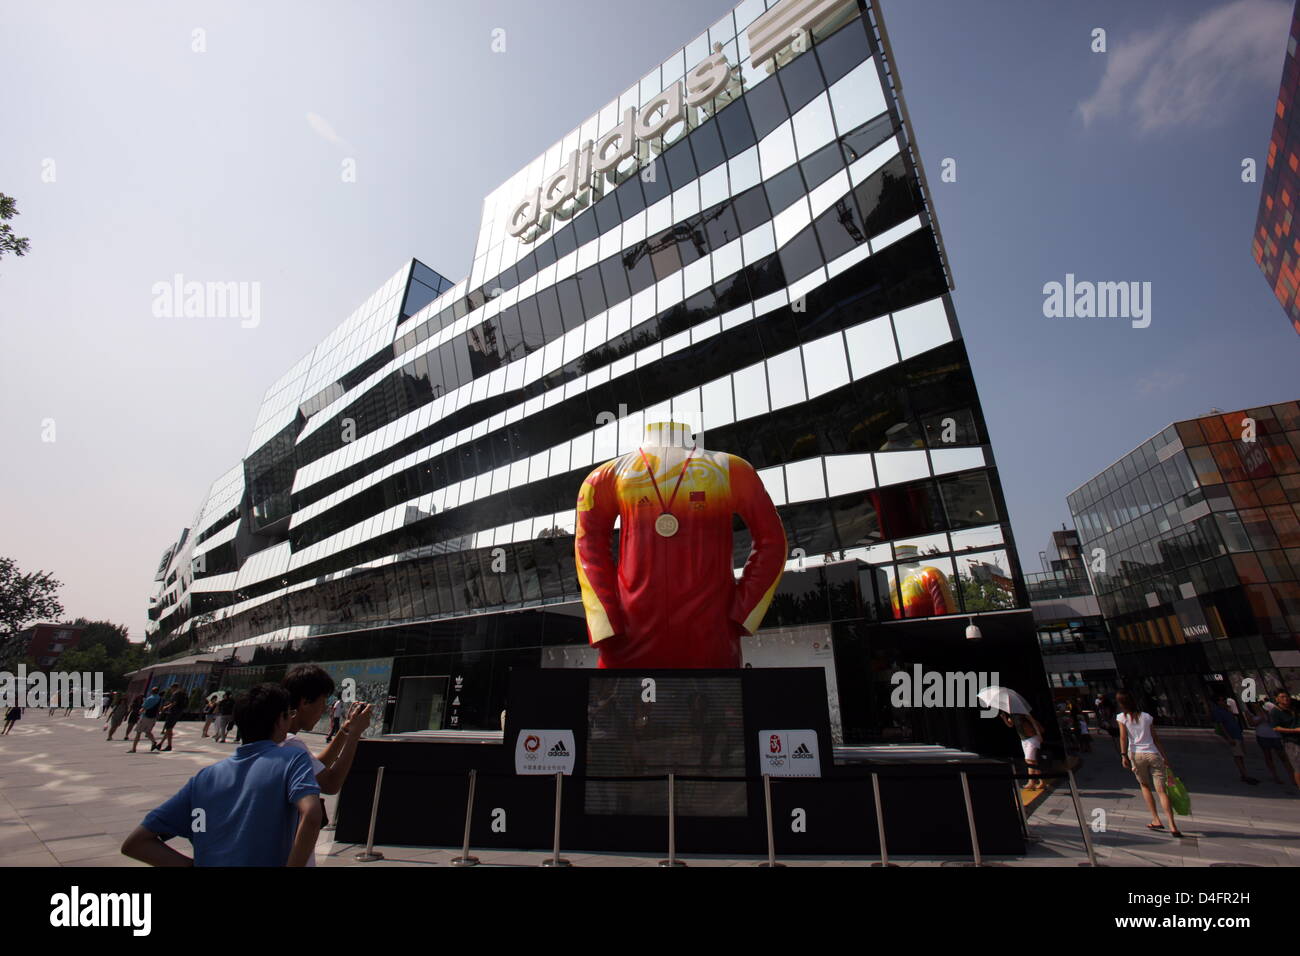 Page 3 - Adidas Store High Resolution Stock Photography and Images - Alamy